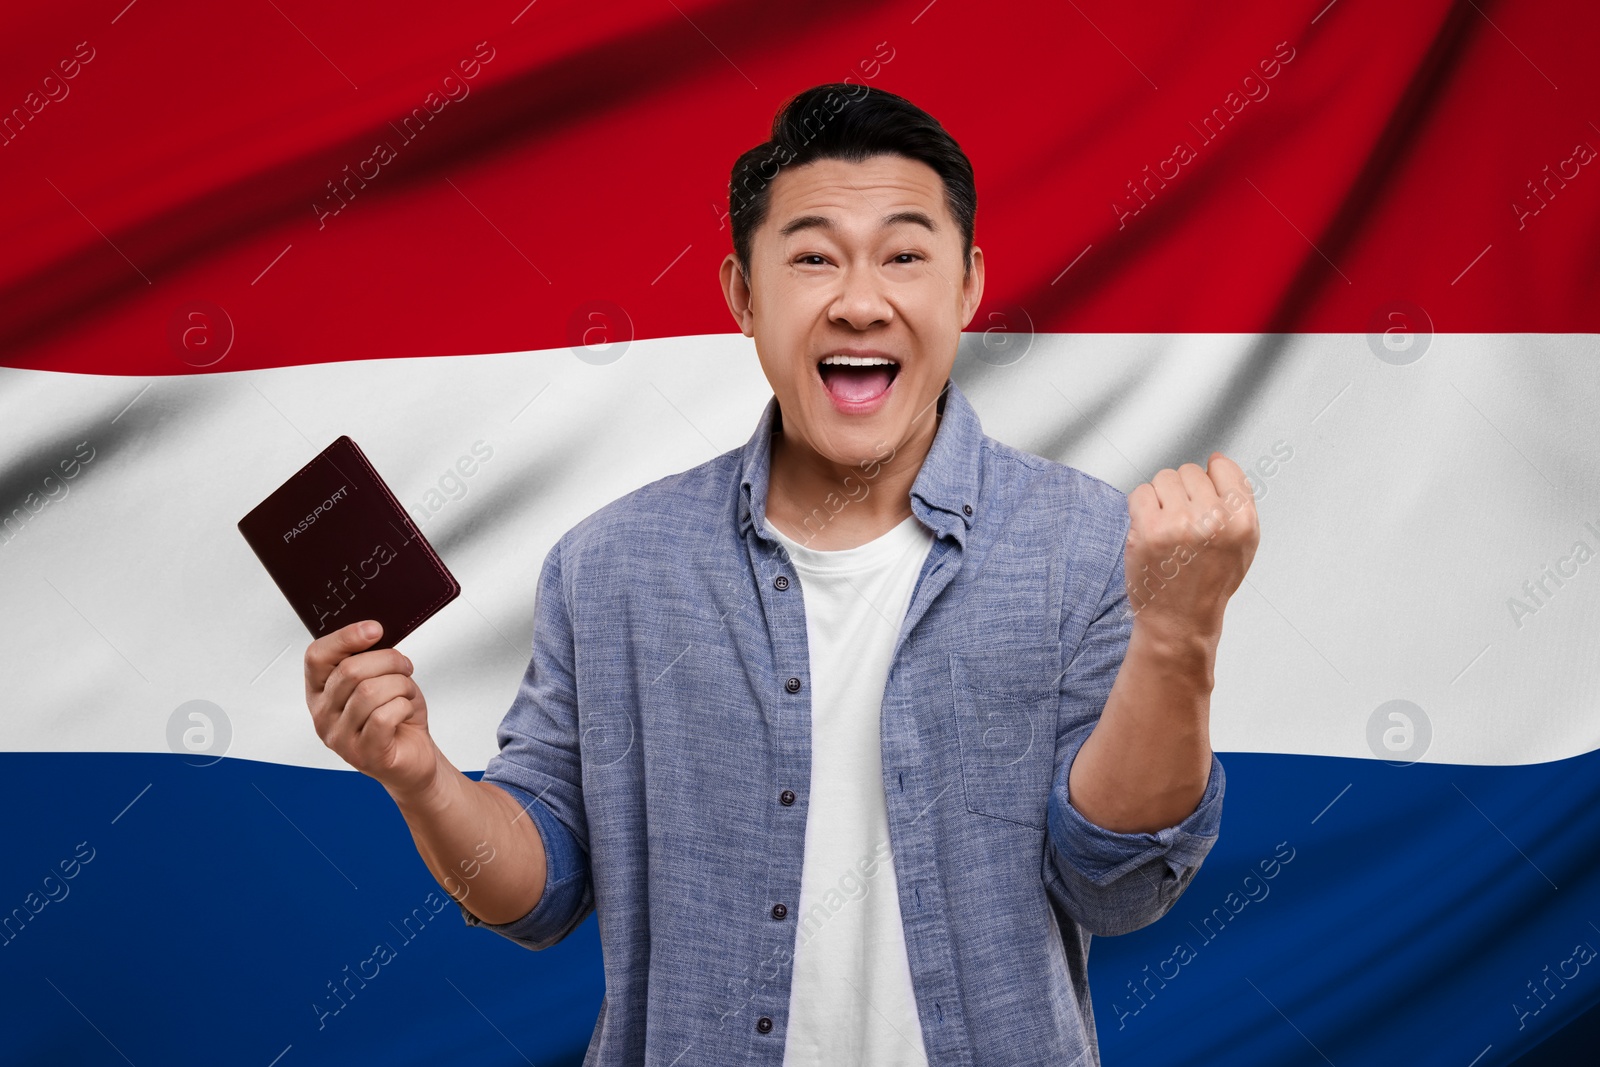 Image of Immigration. Happy man with passport against national flag of Netherlands